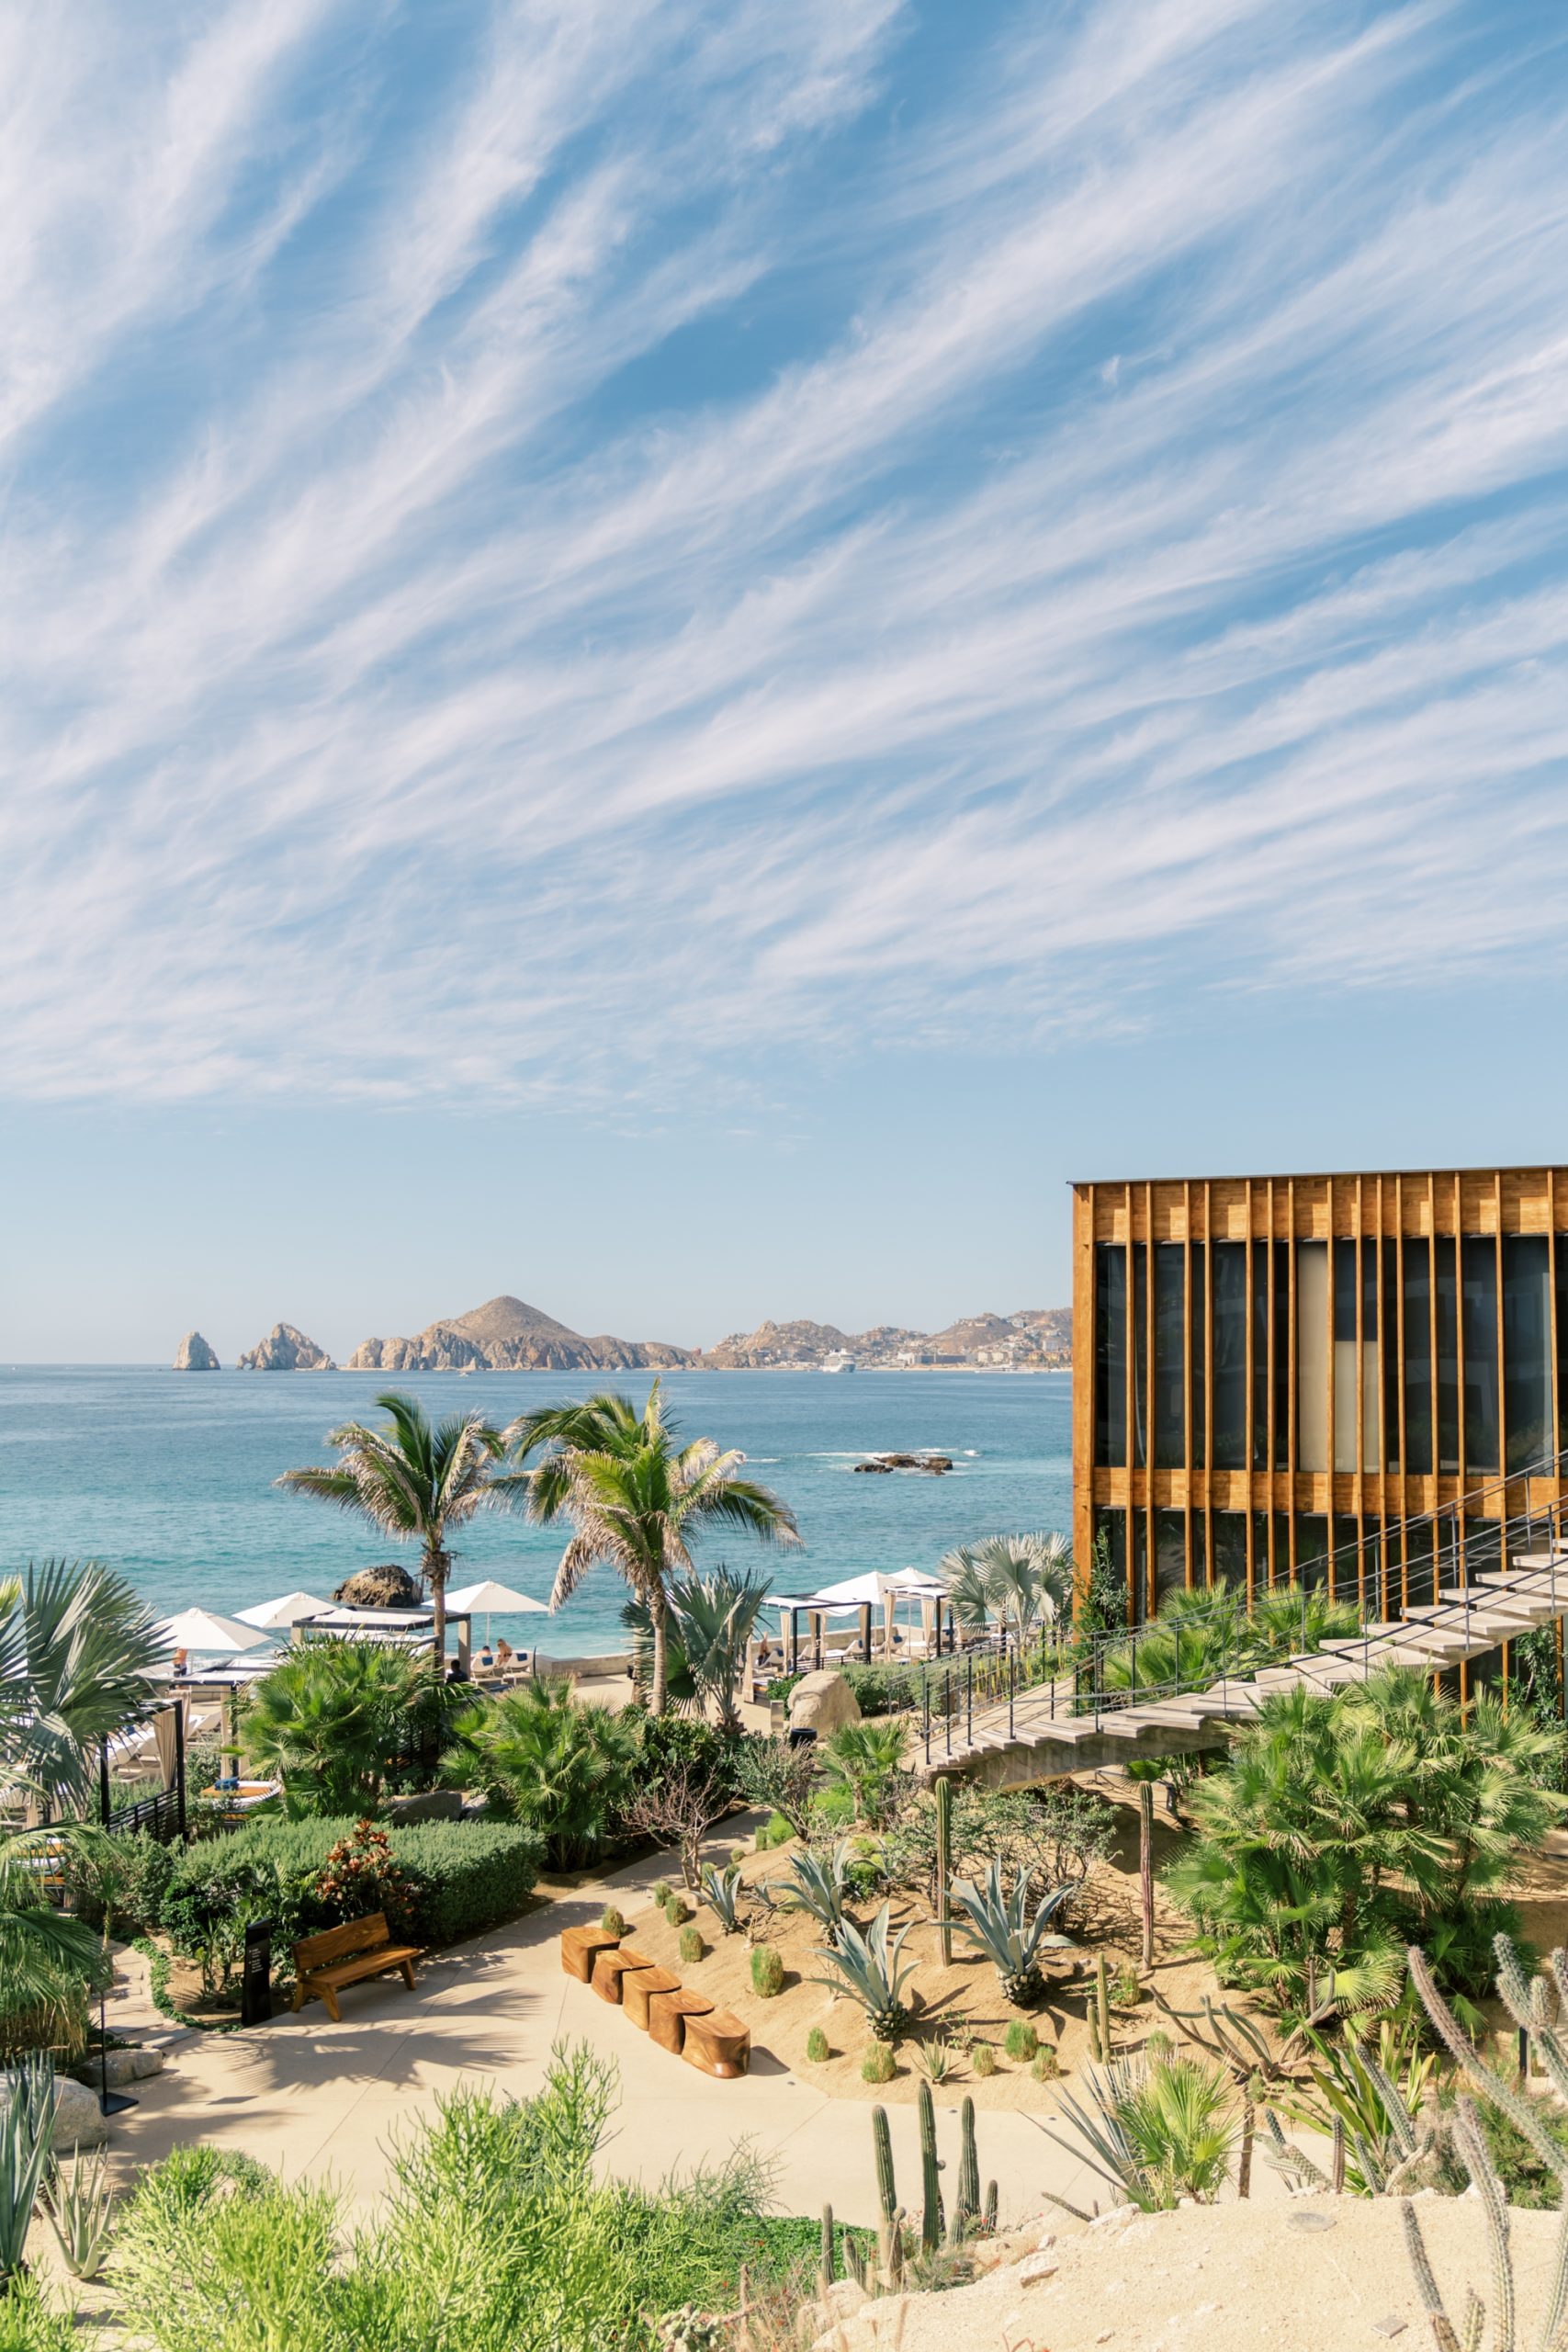 The Cape in Cabo overlooks the ocean and cliffs